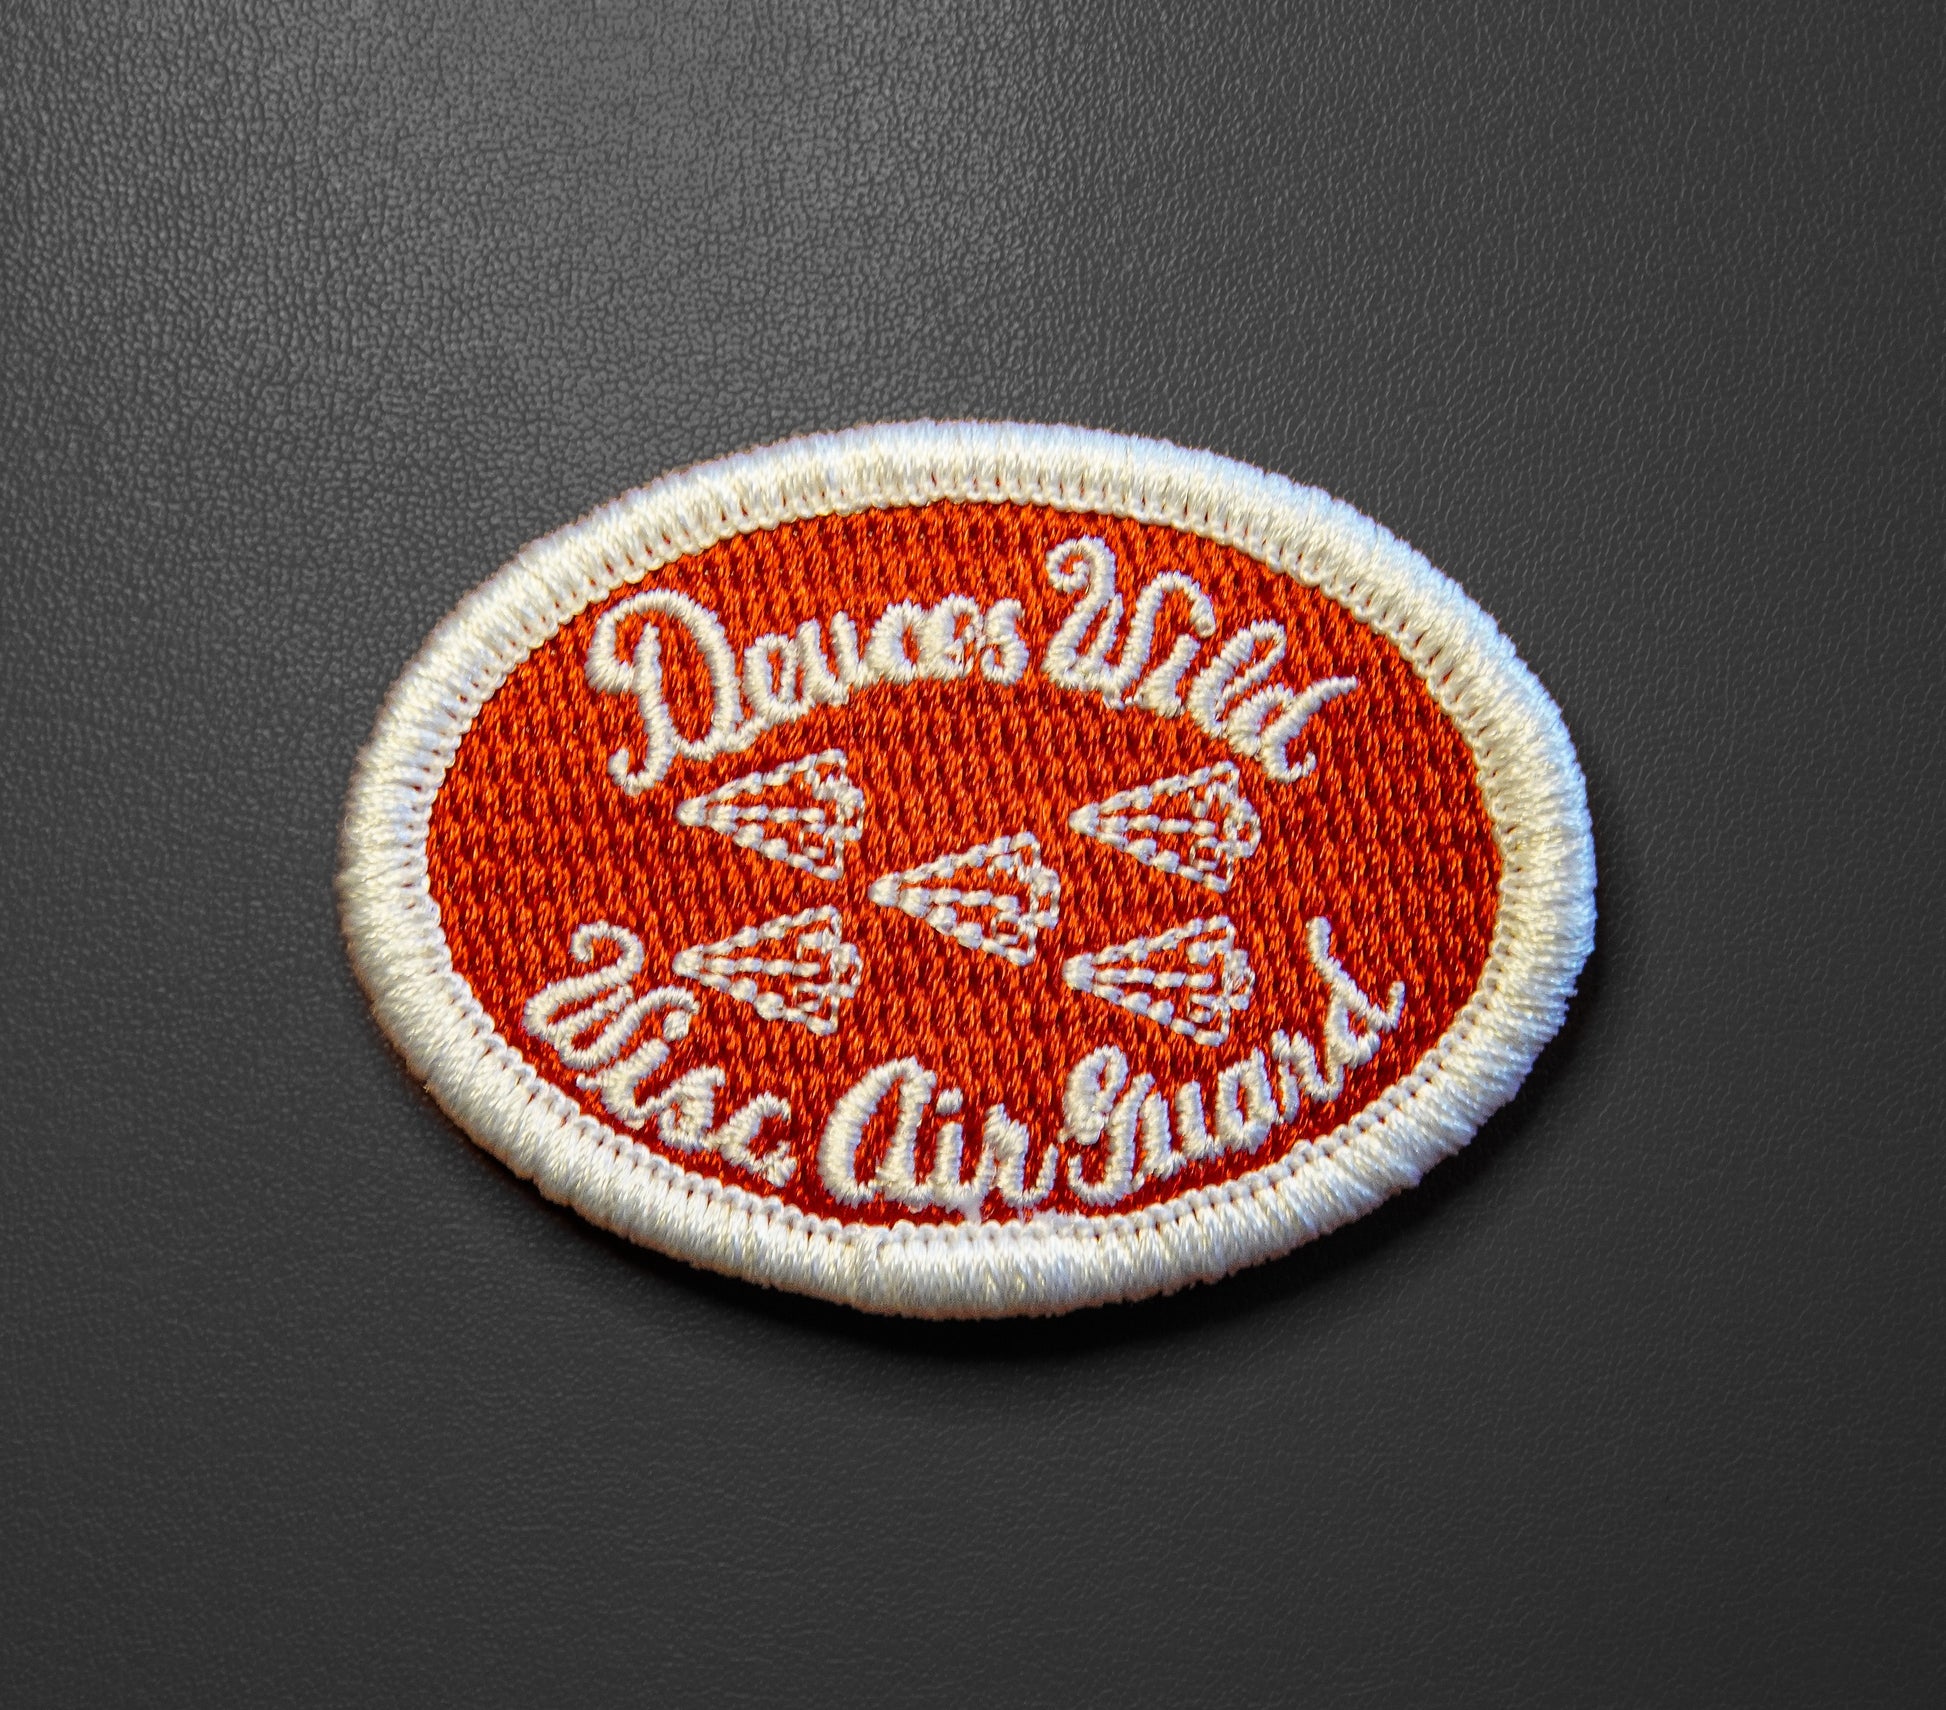 Wisconsin Ang Deuces Wild Patch